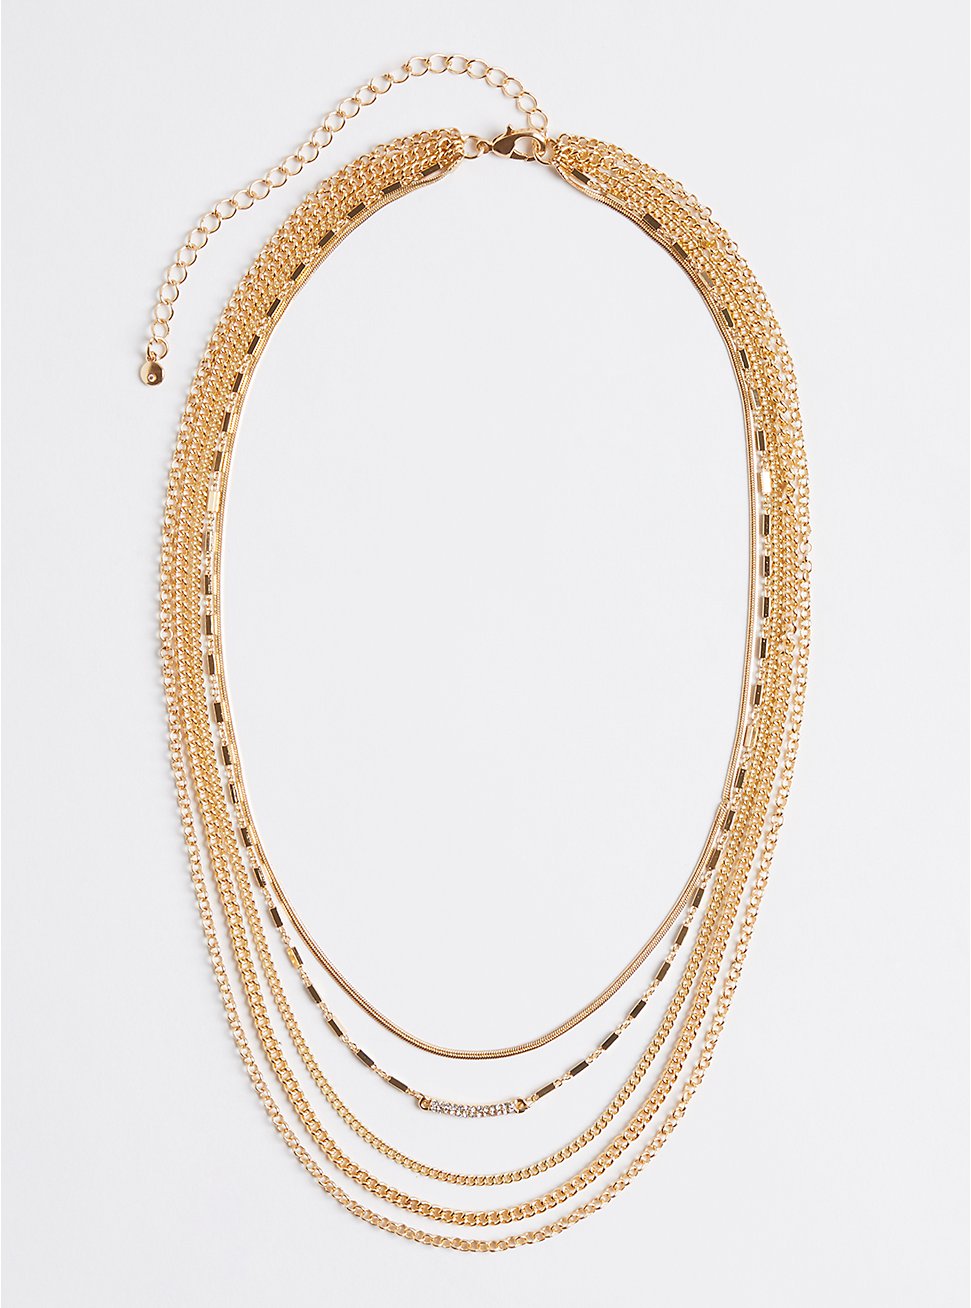 Plus Size Multi Layered Necklace with Bezel Chain - Gold Tone , , hi-res